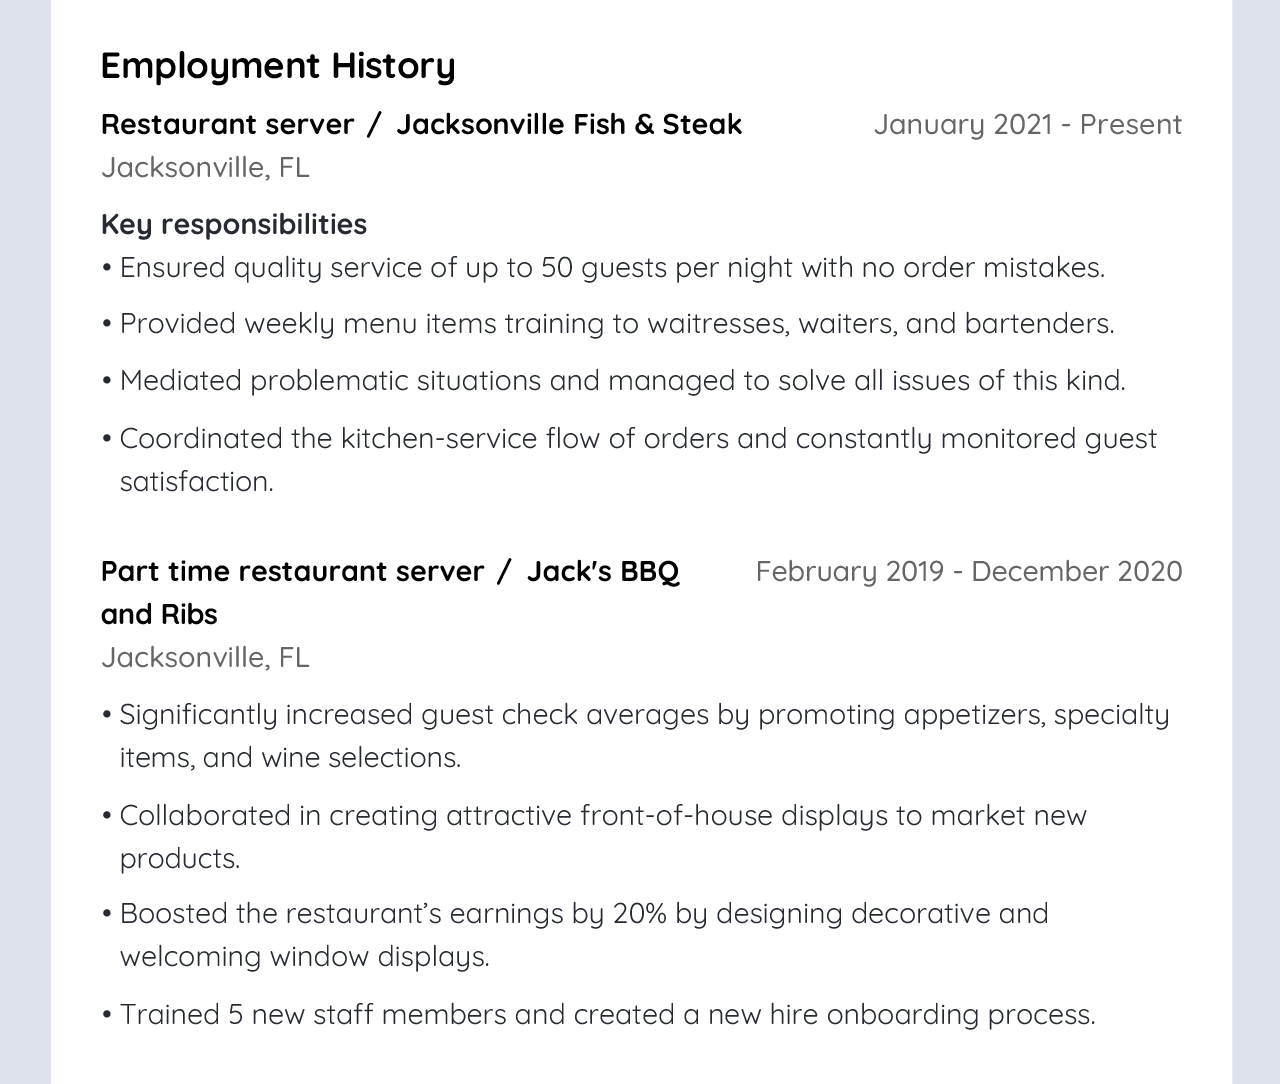 Image of how the employment history of a restaurant server looks like on a finished restaurant server resume